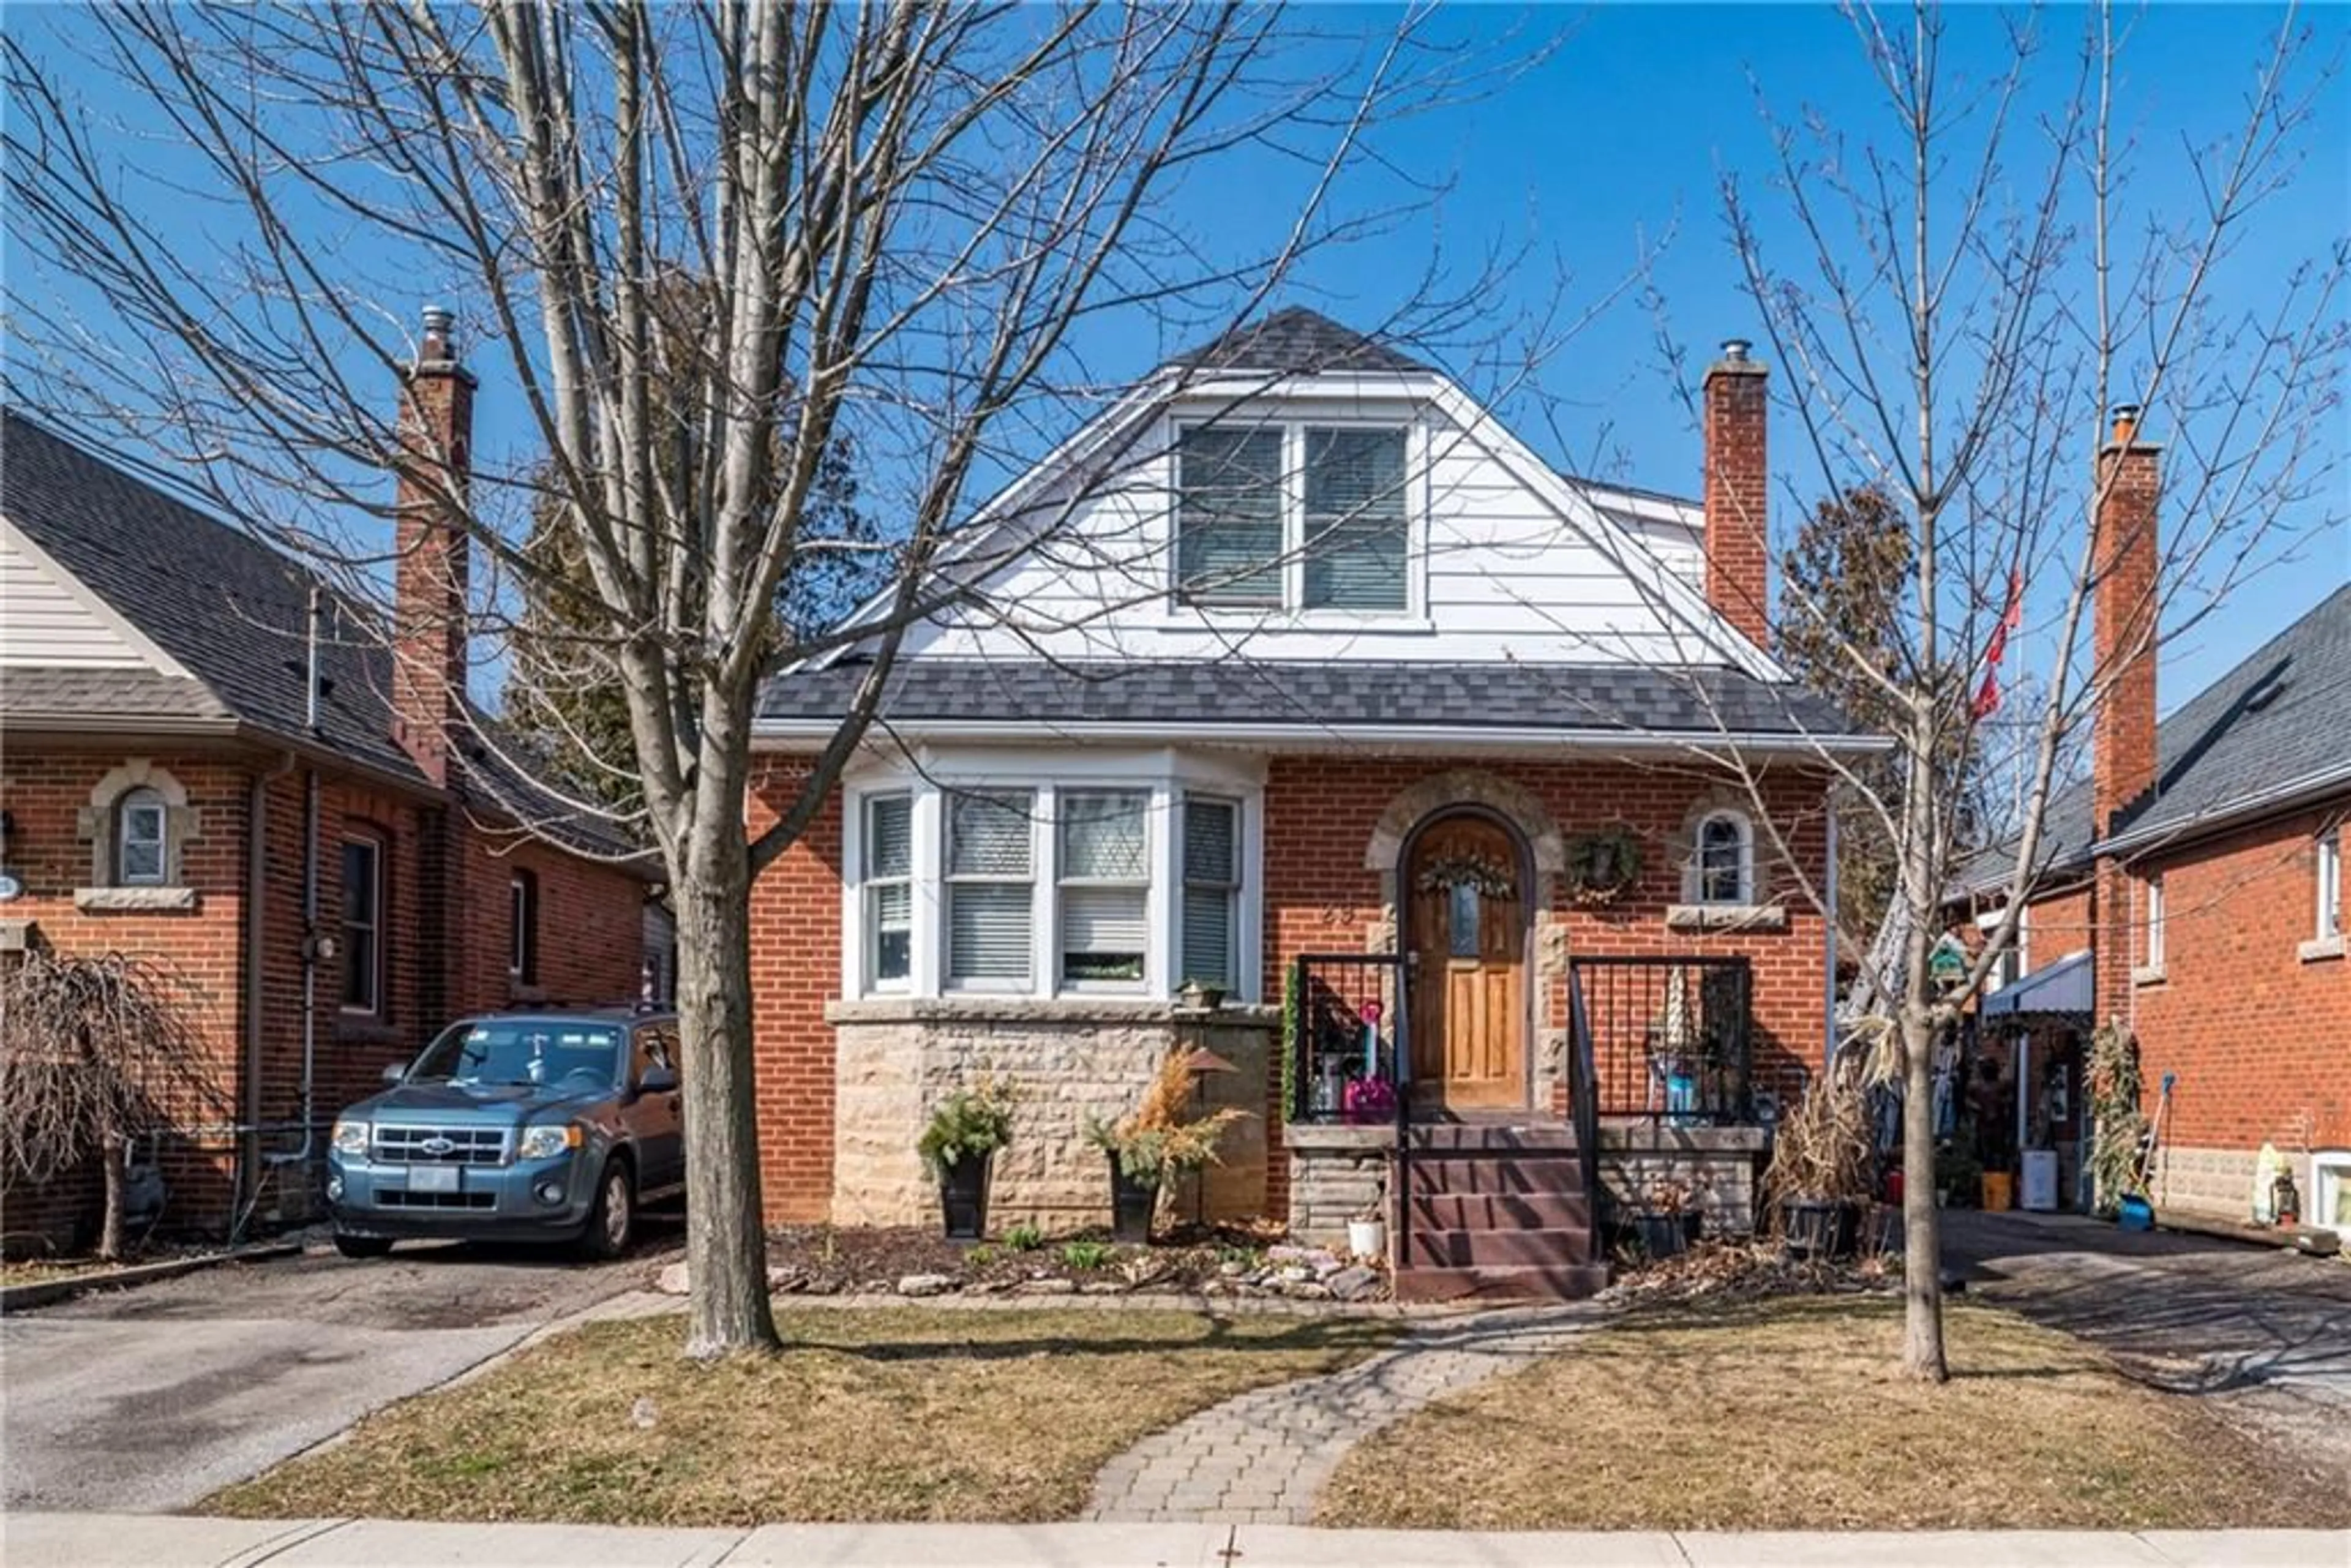 Home with brick exterior material for 29 Uplands Ave, Hamilton Ontario L8S 3X6